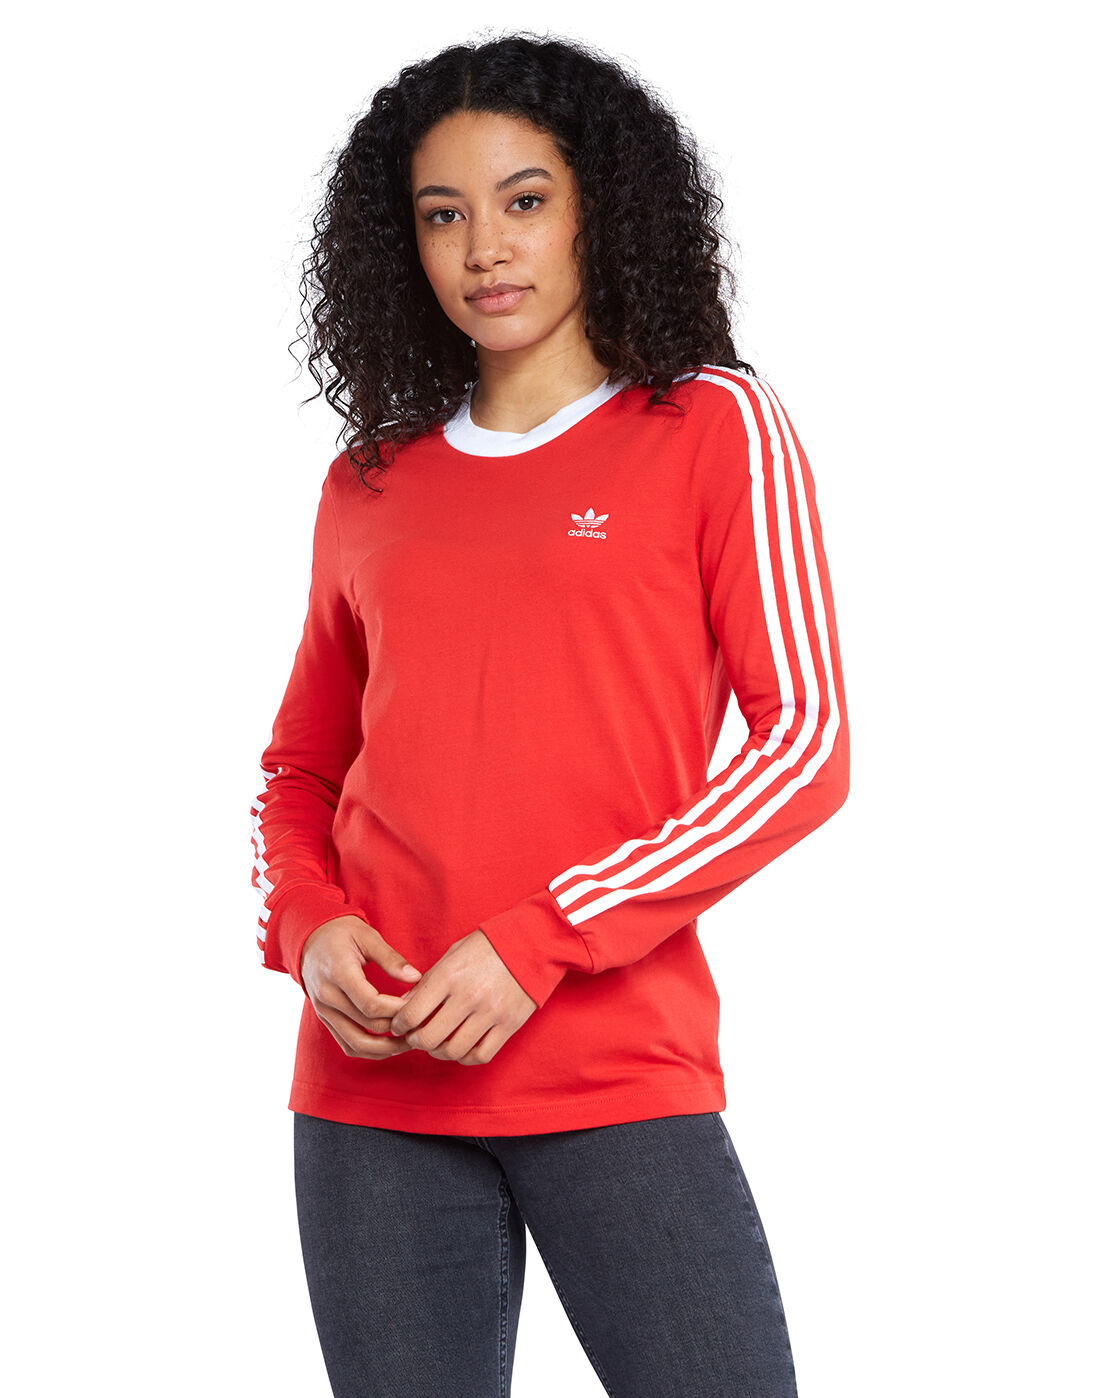 adidas Originals Womens 3-Stripes Long Sleeve T-shirt - Red | Life Style  Sports IE